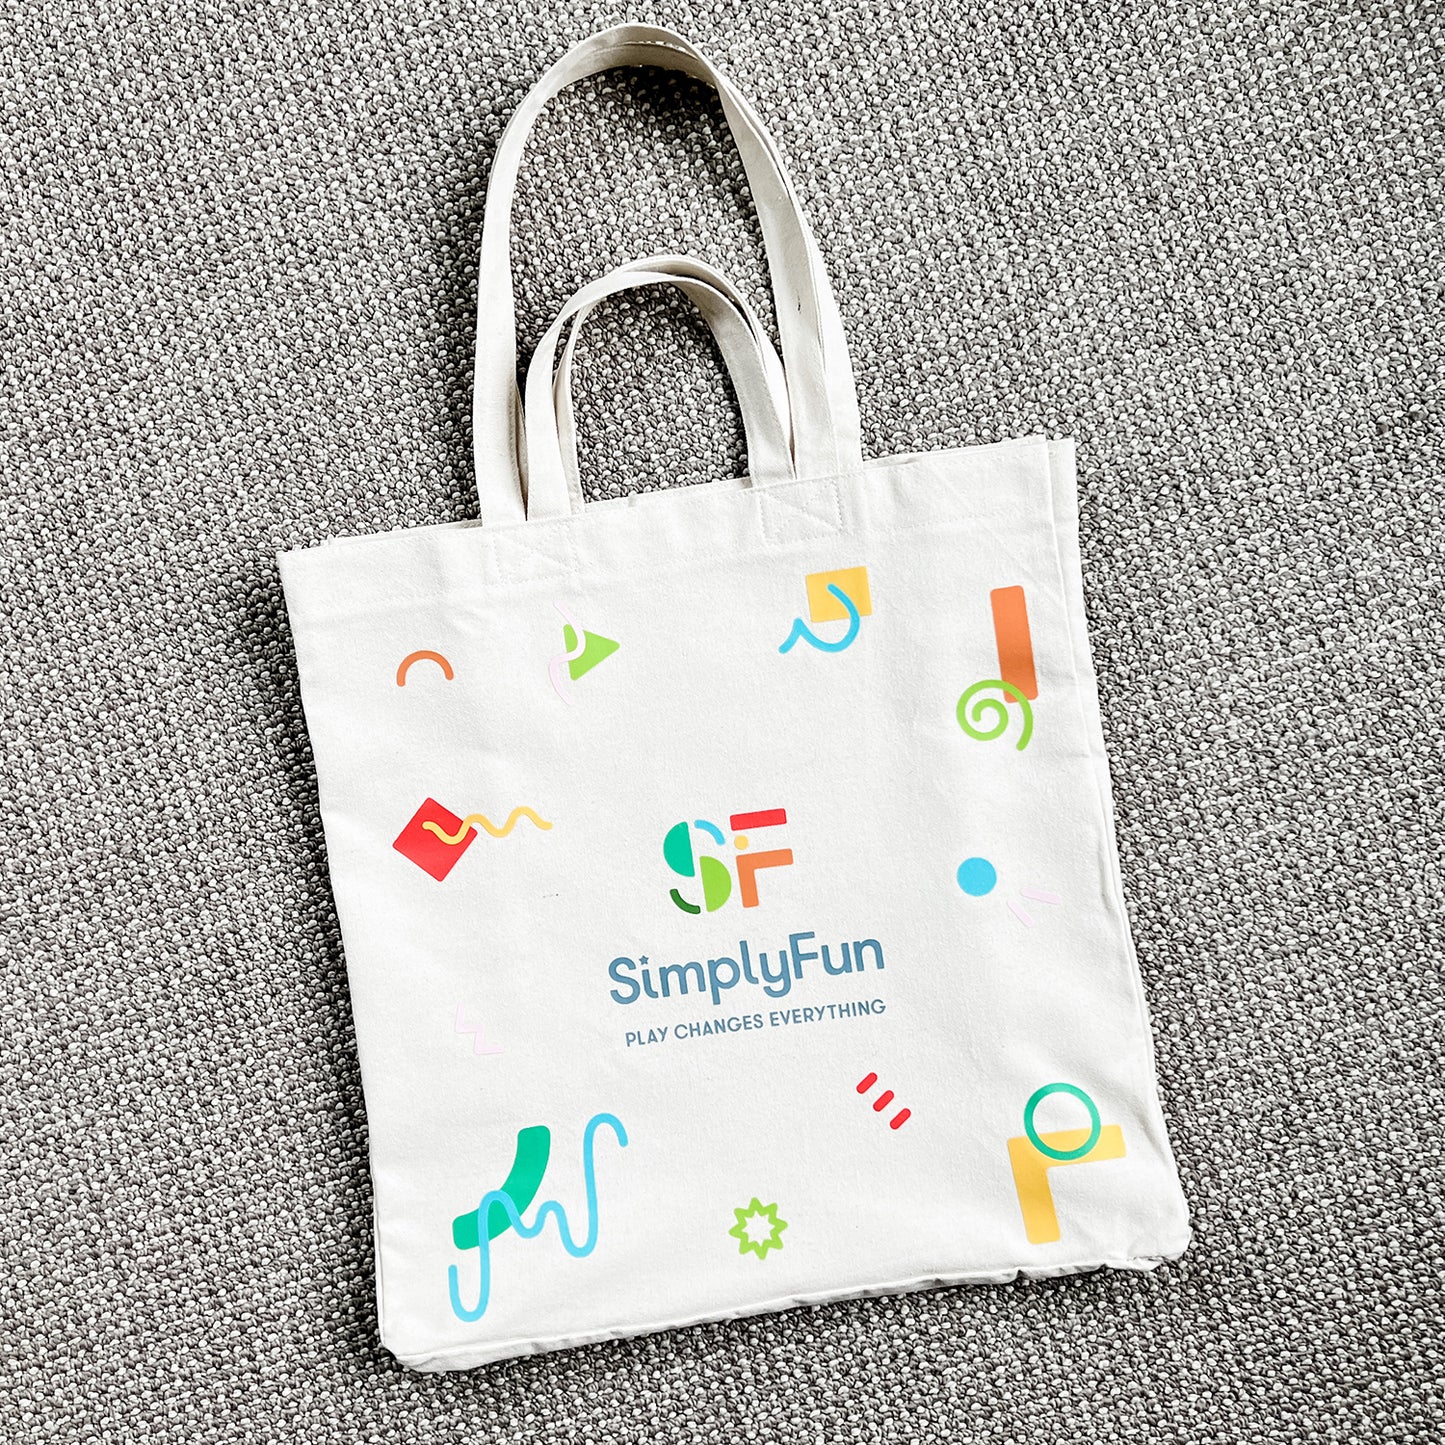 This large canvas tote bag from SimplyFun fits loads of games!